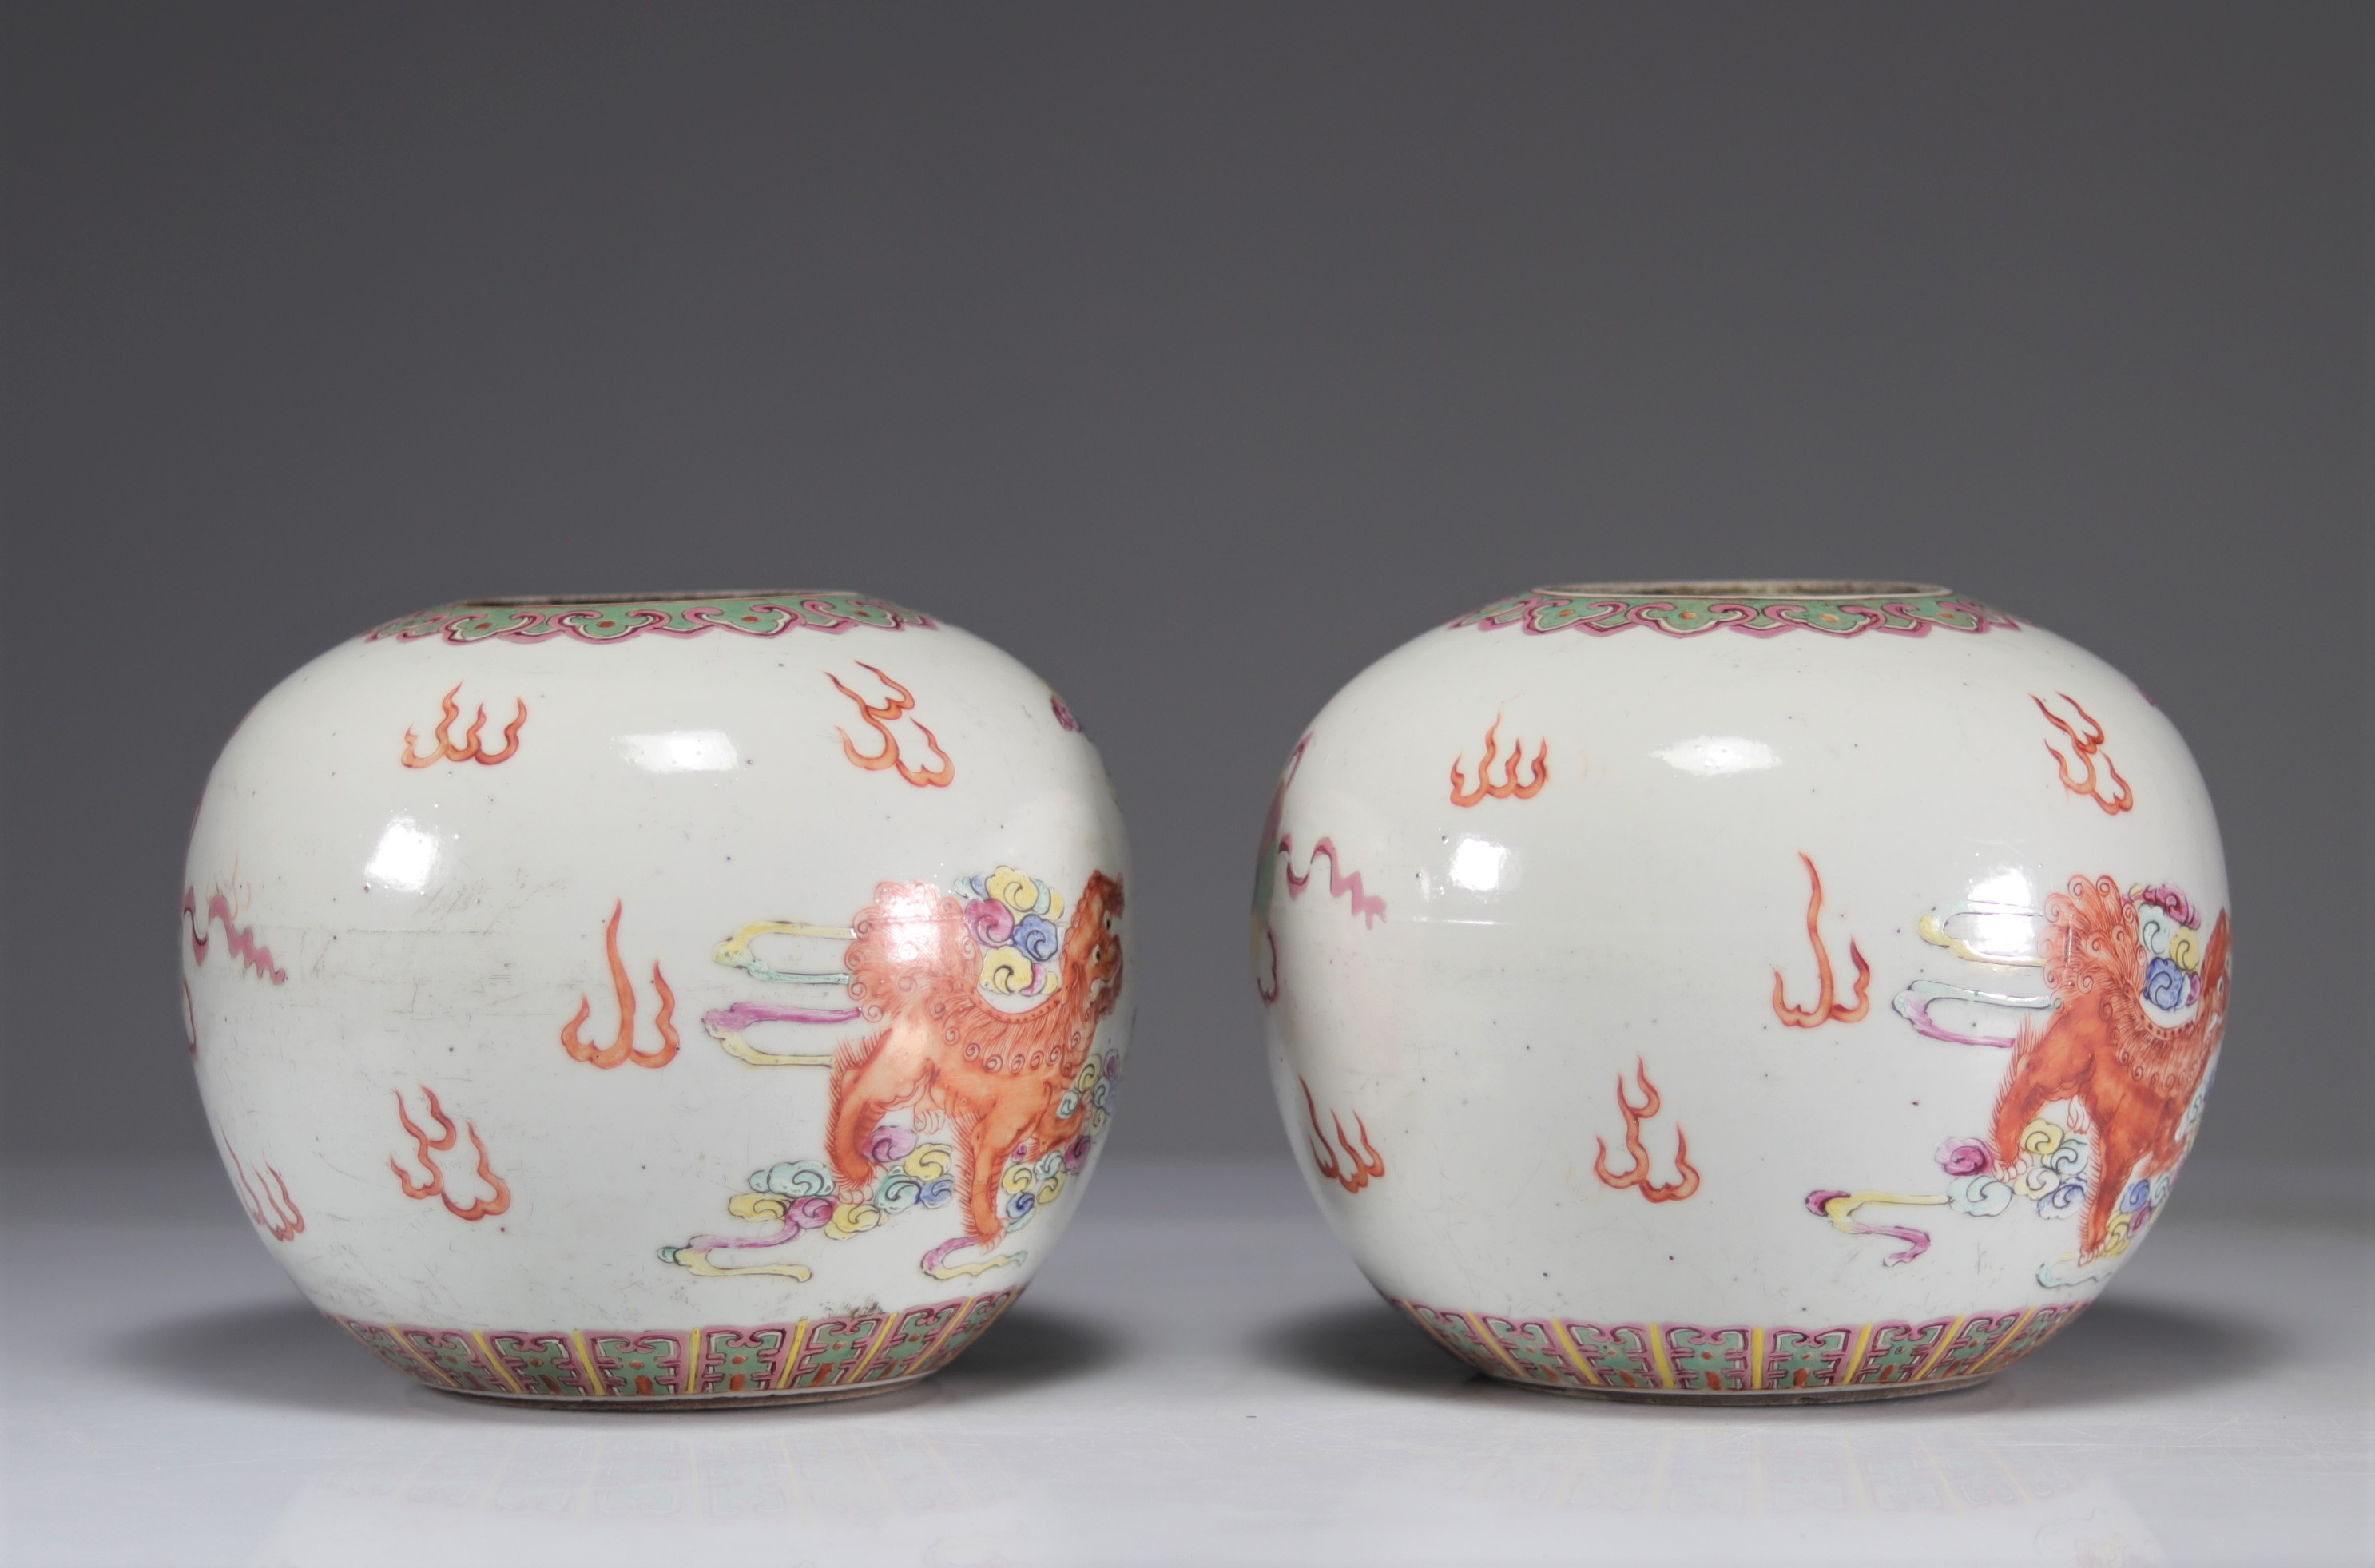 Pair of ball vases decorated with iron red lions - Image 2 of 5